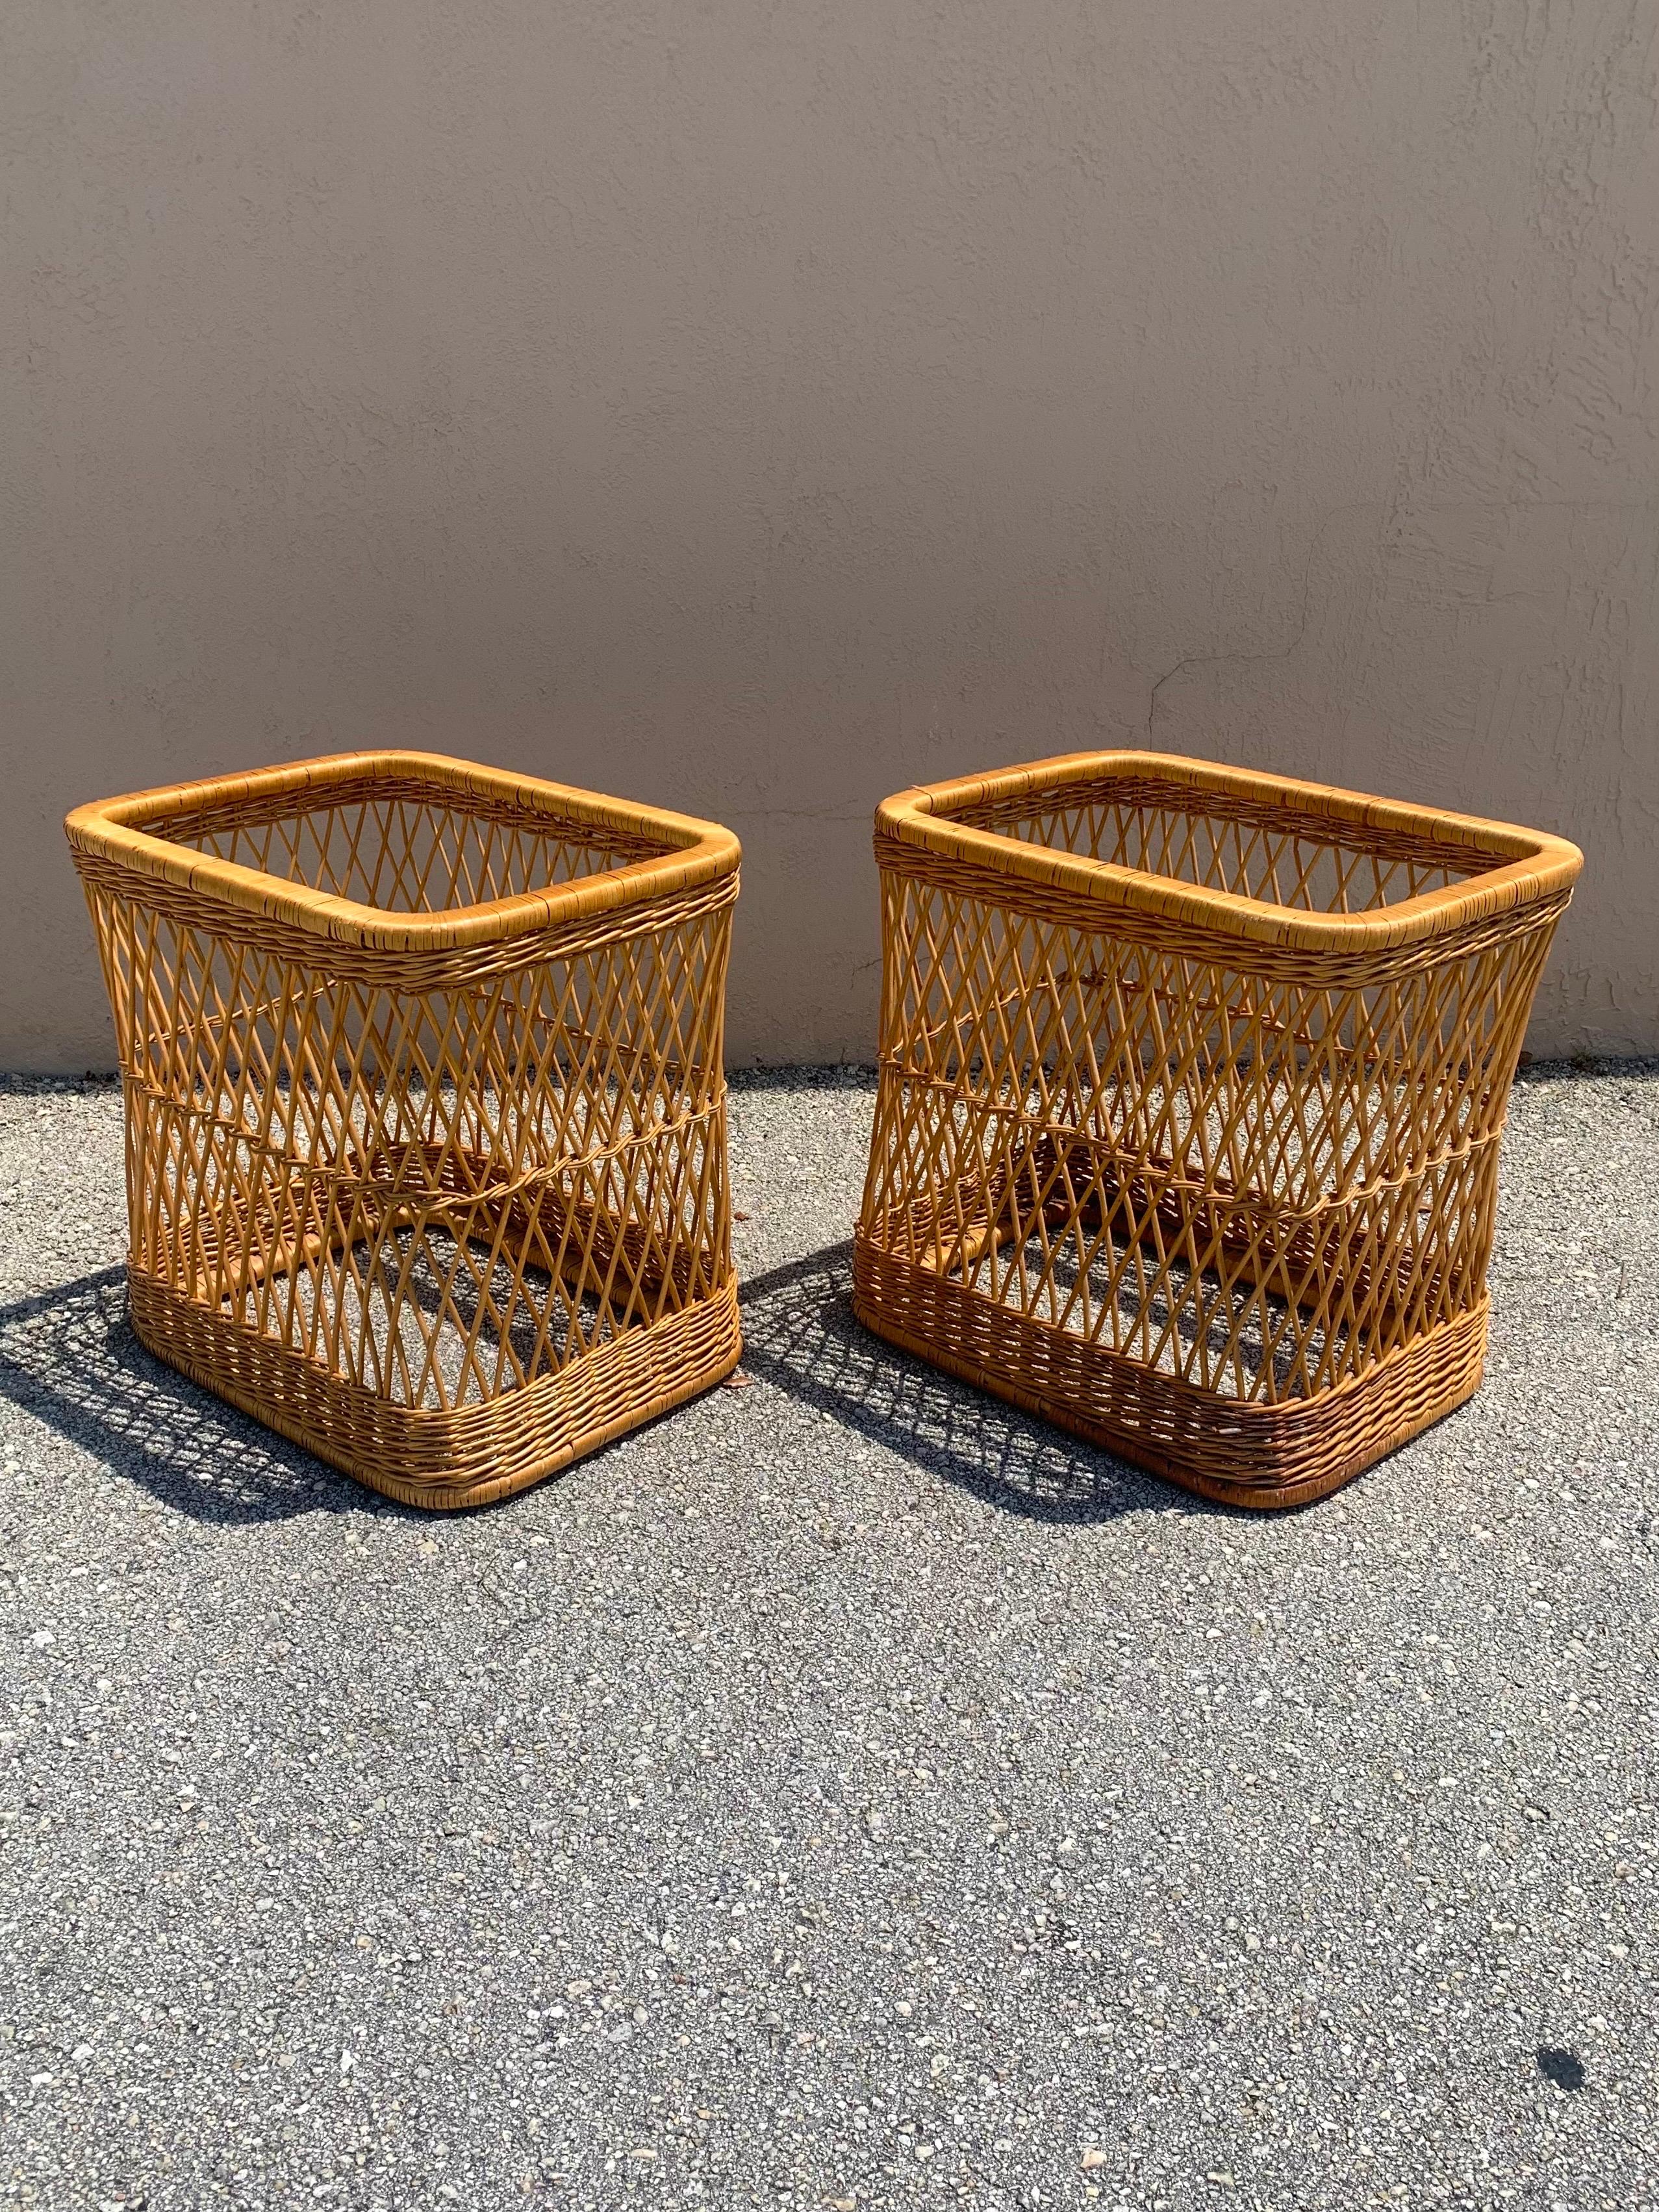 20th Century Rattan and Cane Side Table by Davis Allen for McGuire, a Pair For Sale